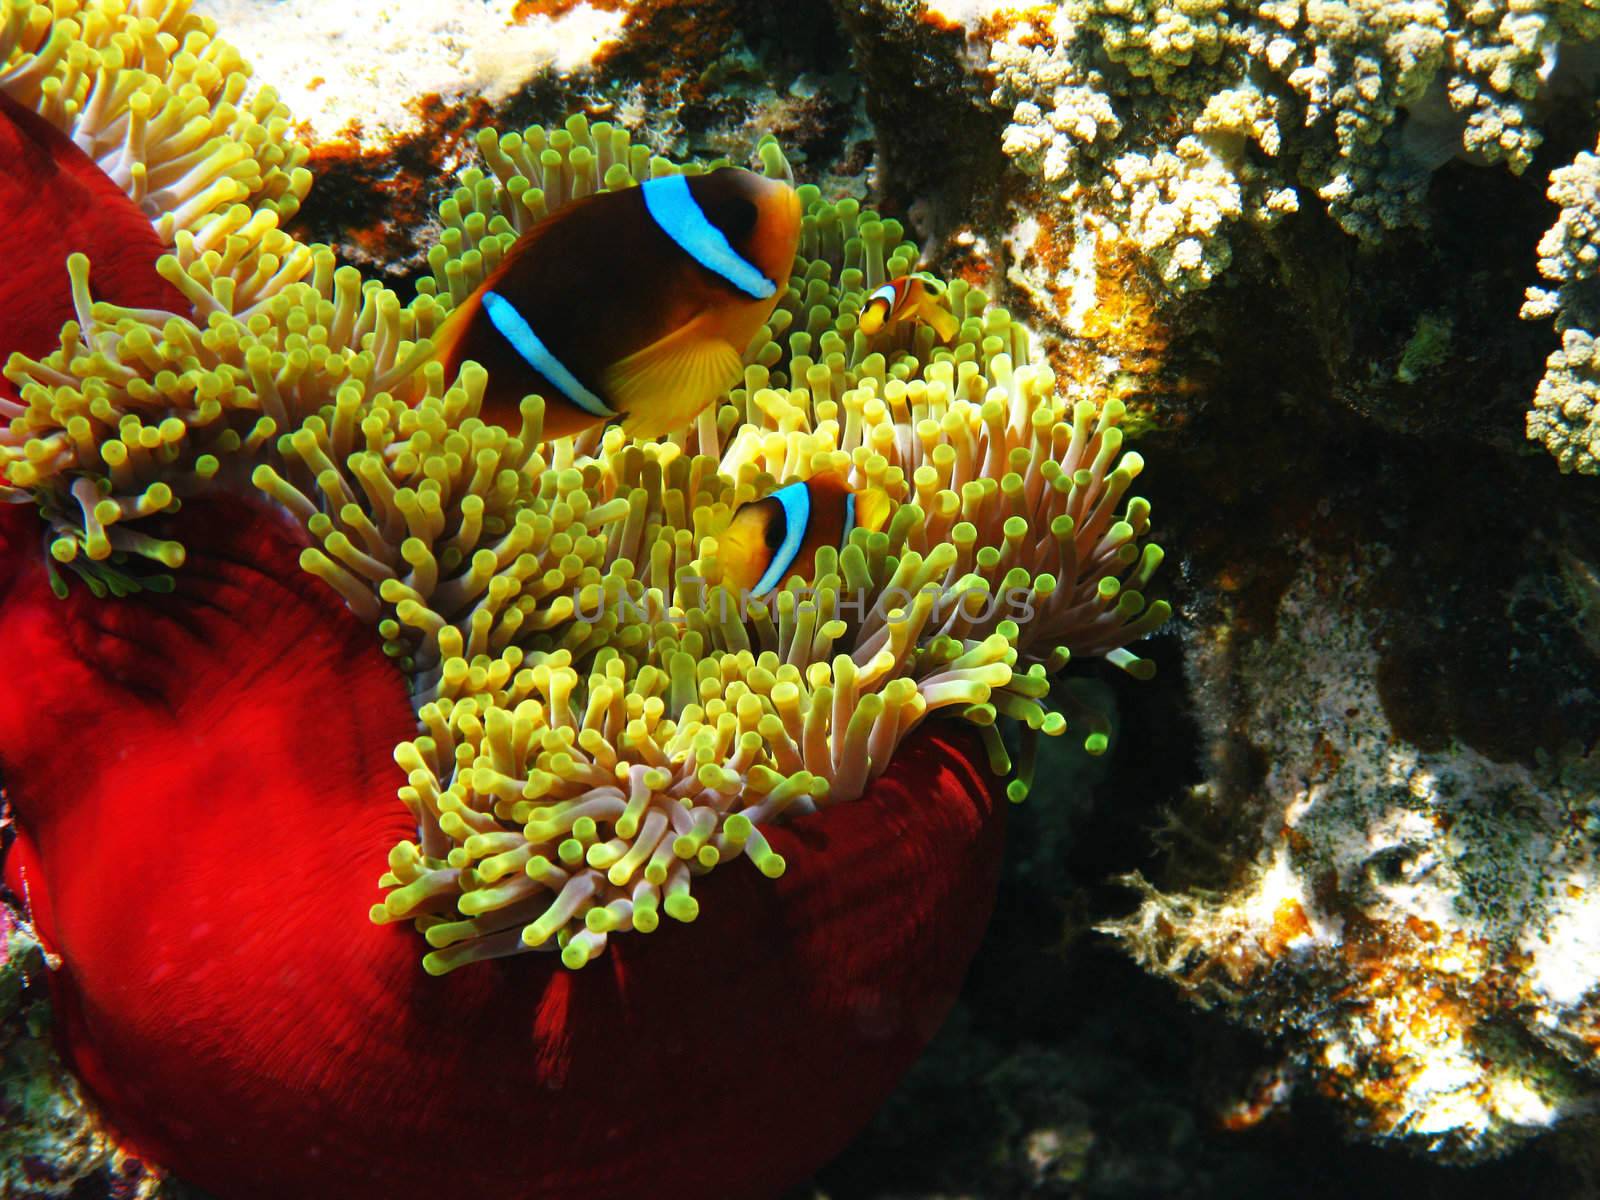 Sea anemones and two-banded clownfishes by vintrom